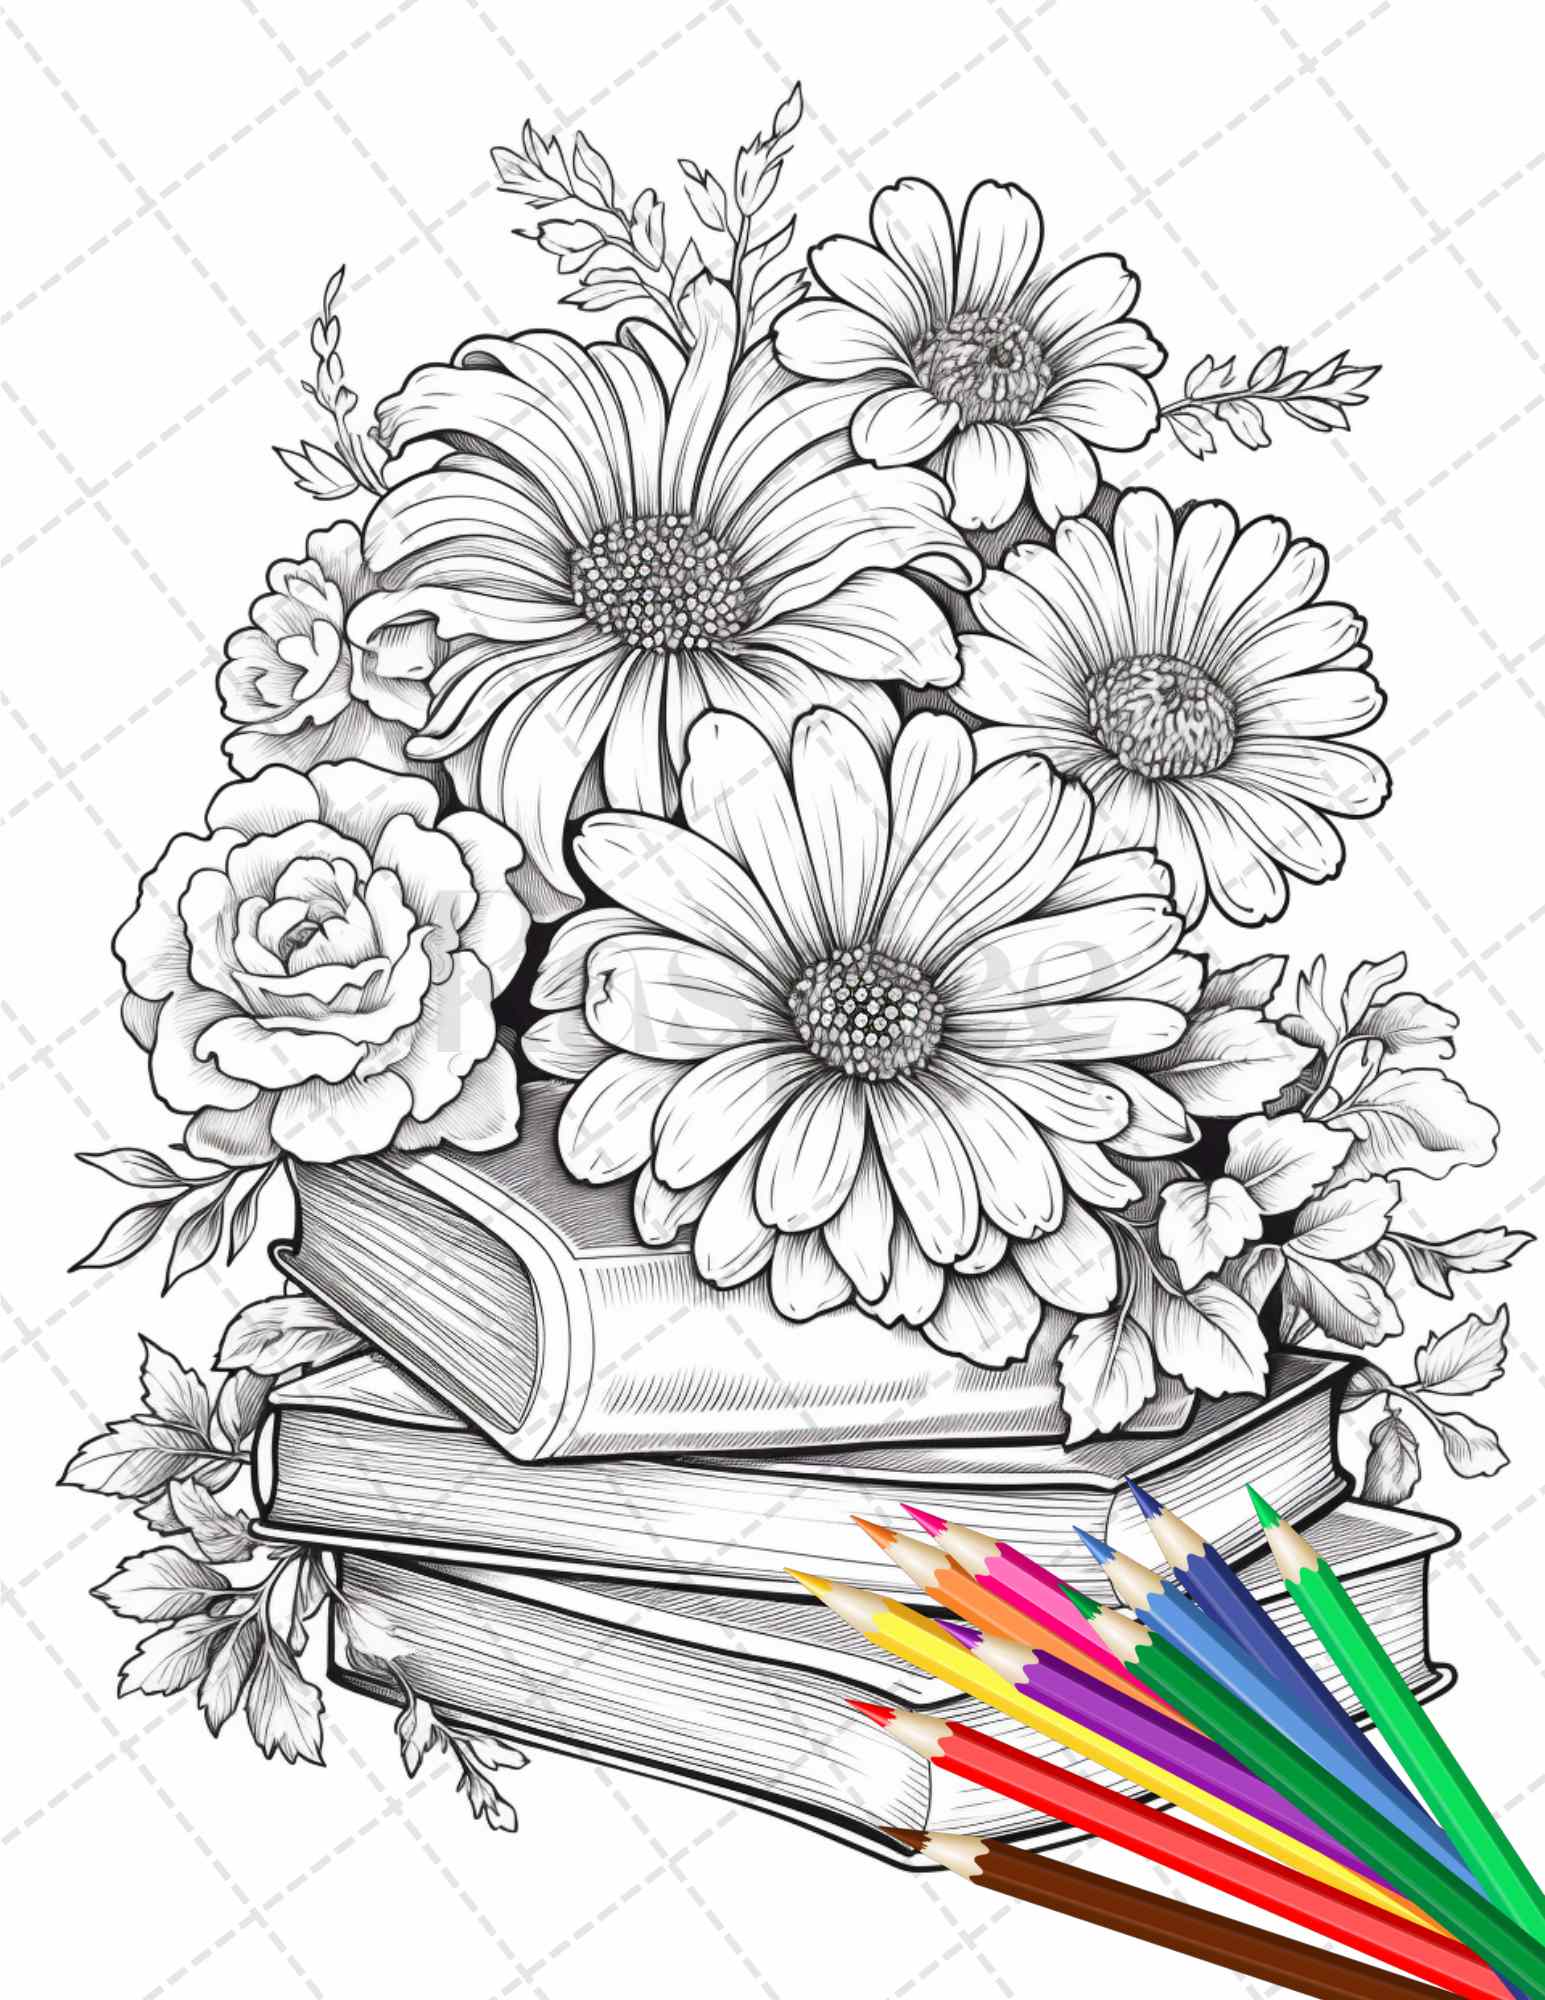 Adult Coloring Pages Premium Coloring Pages Kundanksart Flower Blossom  Grayscale Coloring Instant Download A4,A3 Printable 